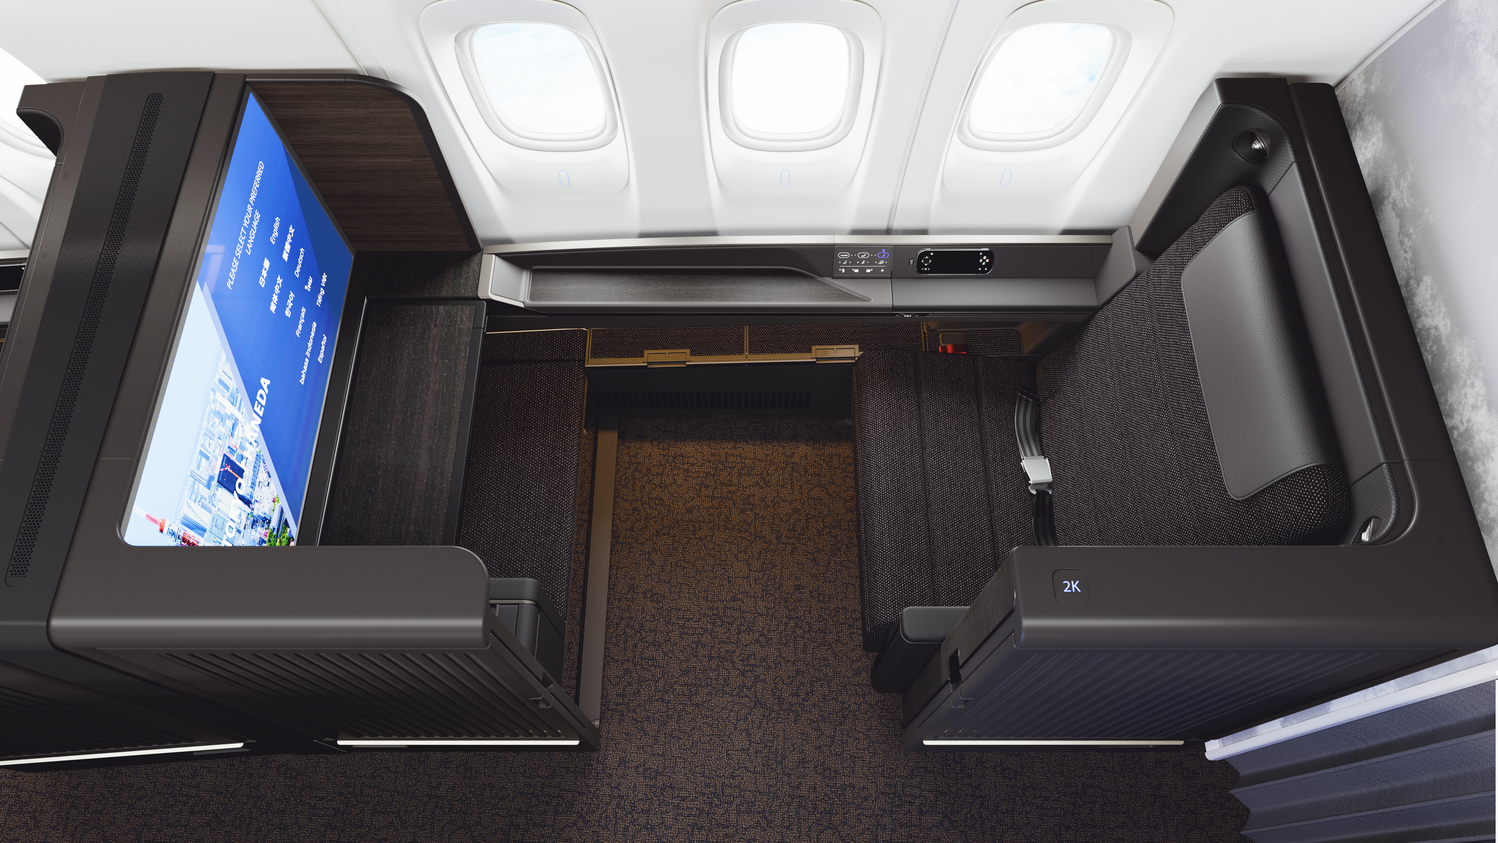 ANA新777-300 First Class / Business Suite Class